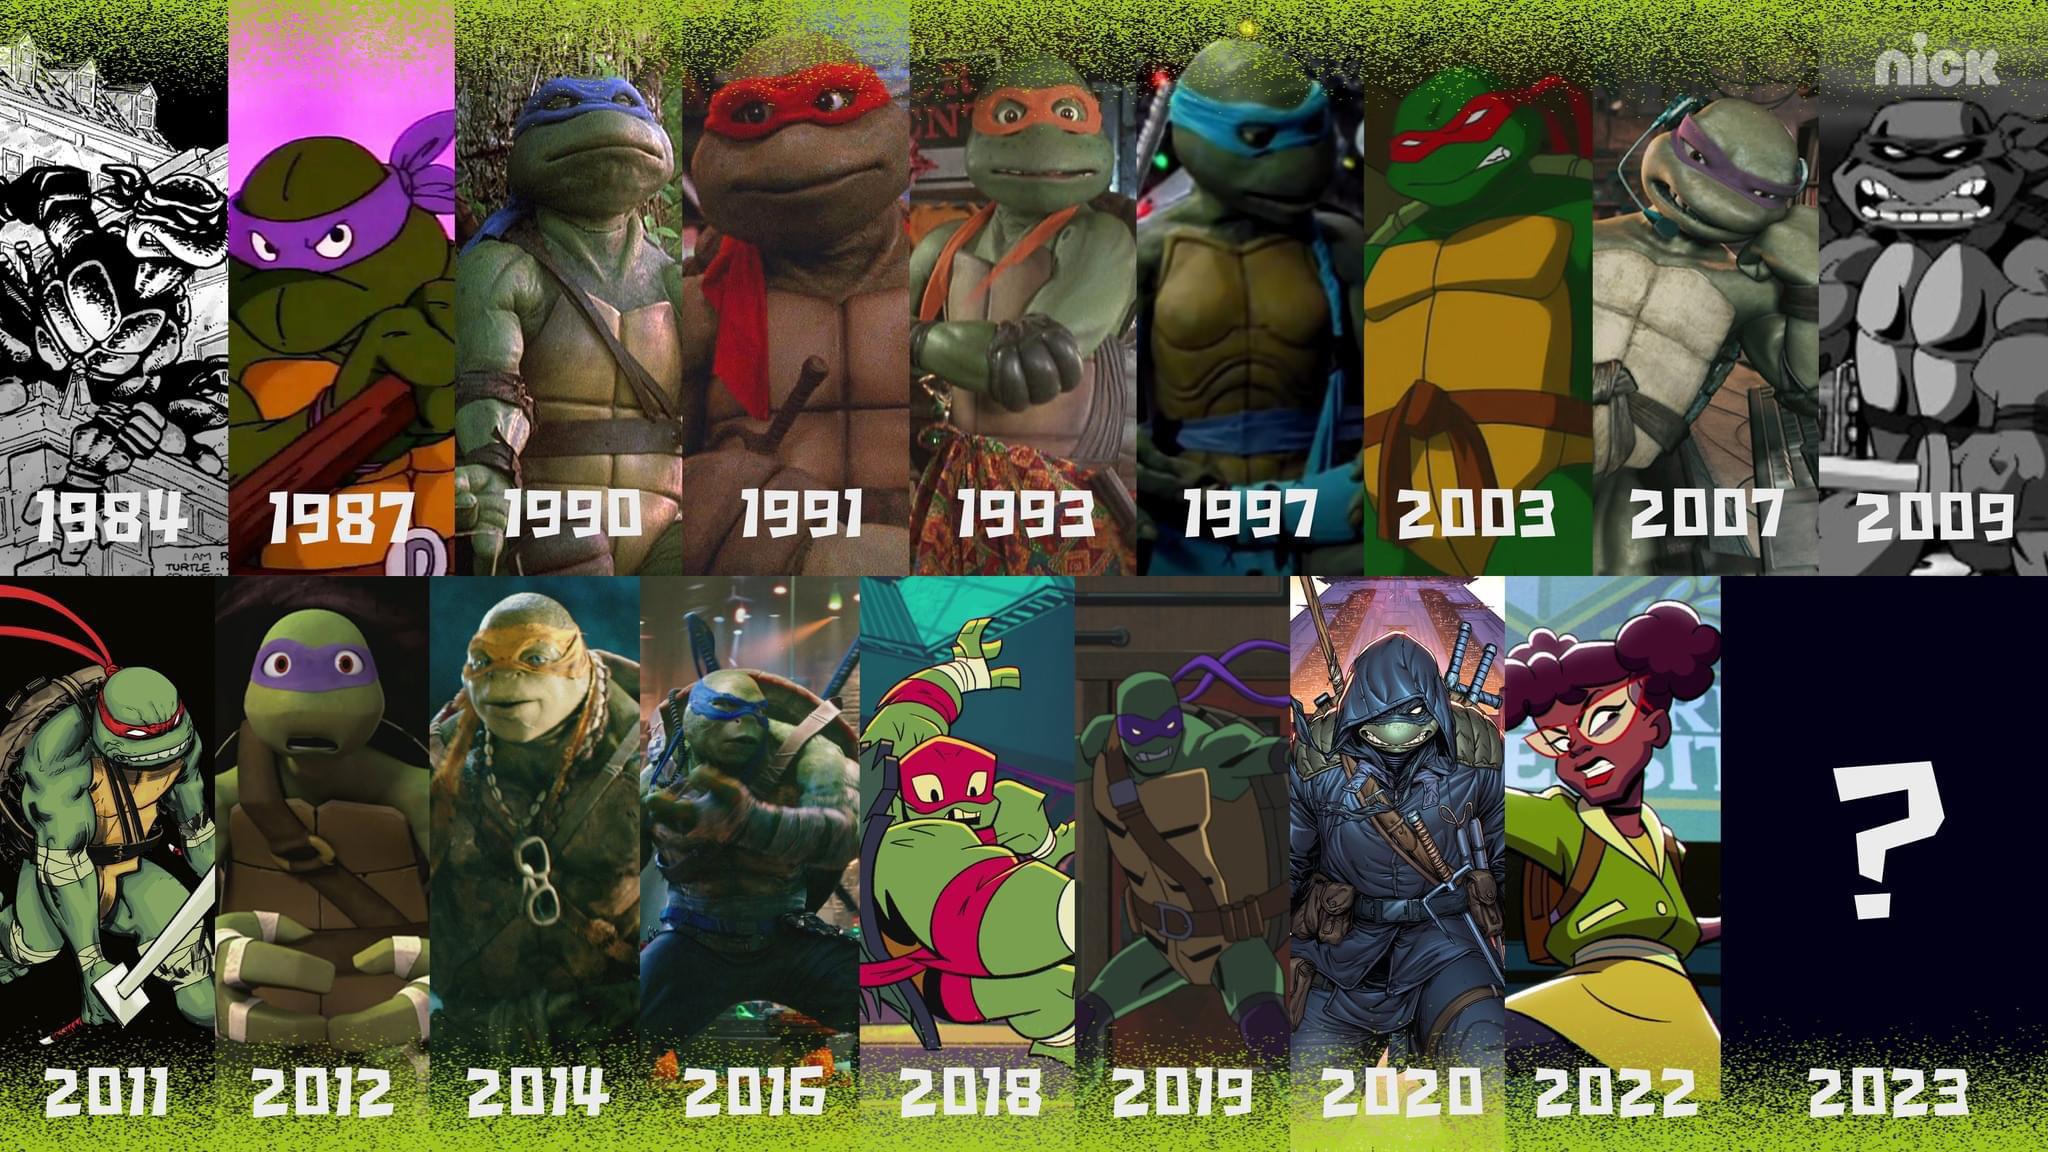 As we approach 39 years of Turtle Power, which iteration of TMNT is your favourite? And are you excited for Mutant Mayhem in 2023? (Image from TMNT Facebook Page)